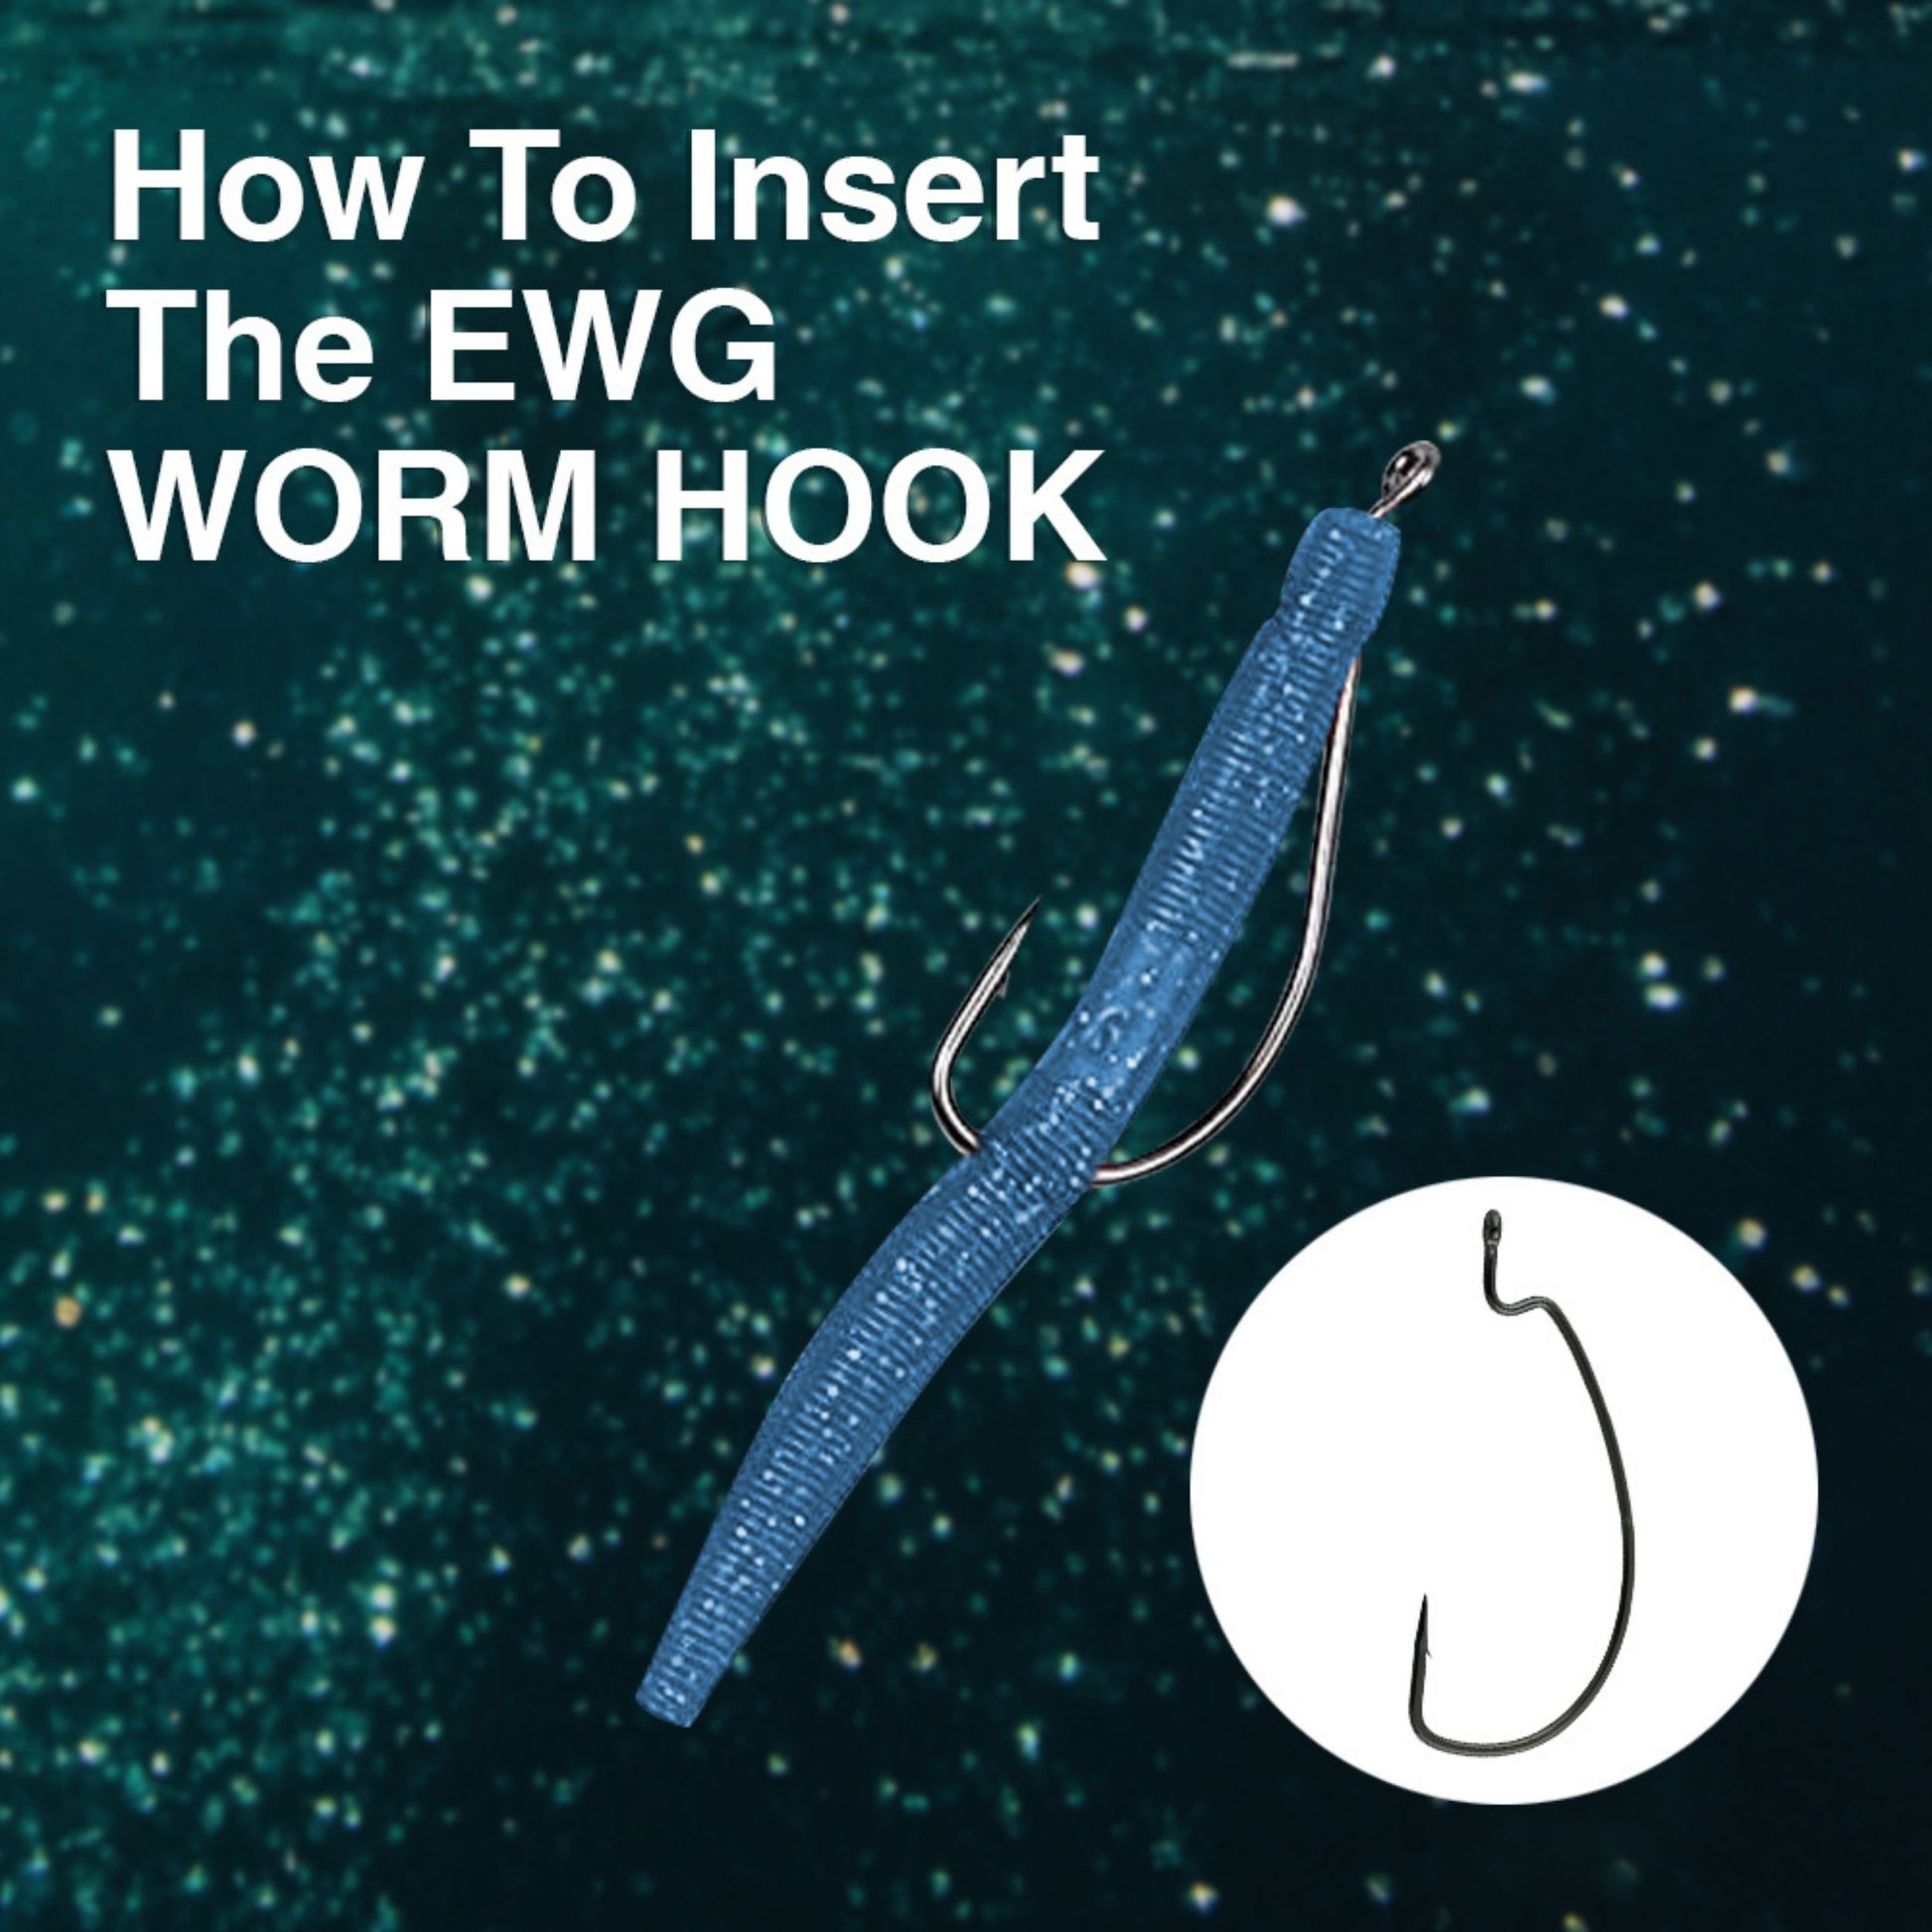  Offset-Worm-Hooks-for-Bass-Fishing-Rubber-Worms-Ewg-Wide-Gap- Bass-Hooks Freshwater Texas Rig Soft Plastics Worms Bait Fishing Hook Black  Red Colored 1/0 2/0 3/0 4/0